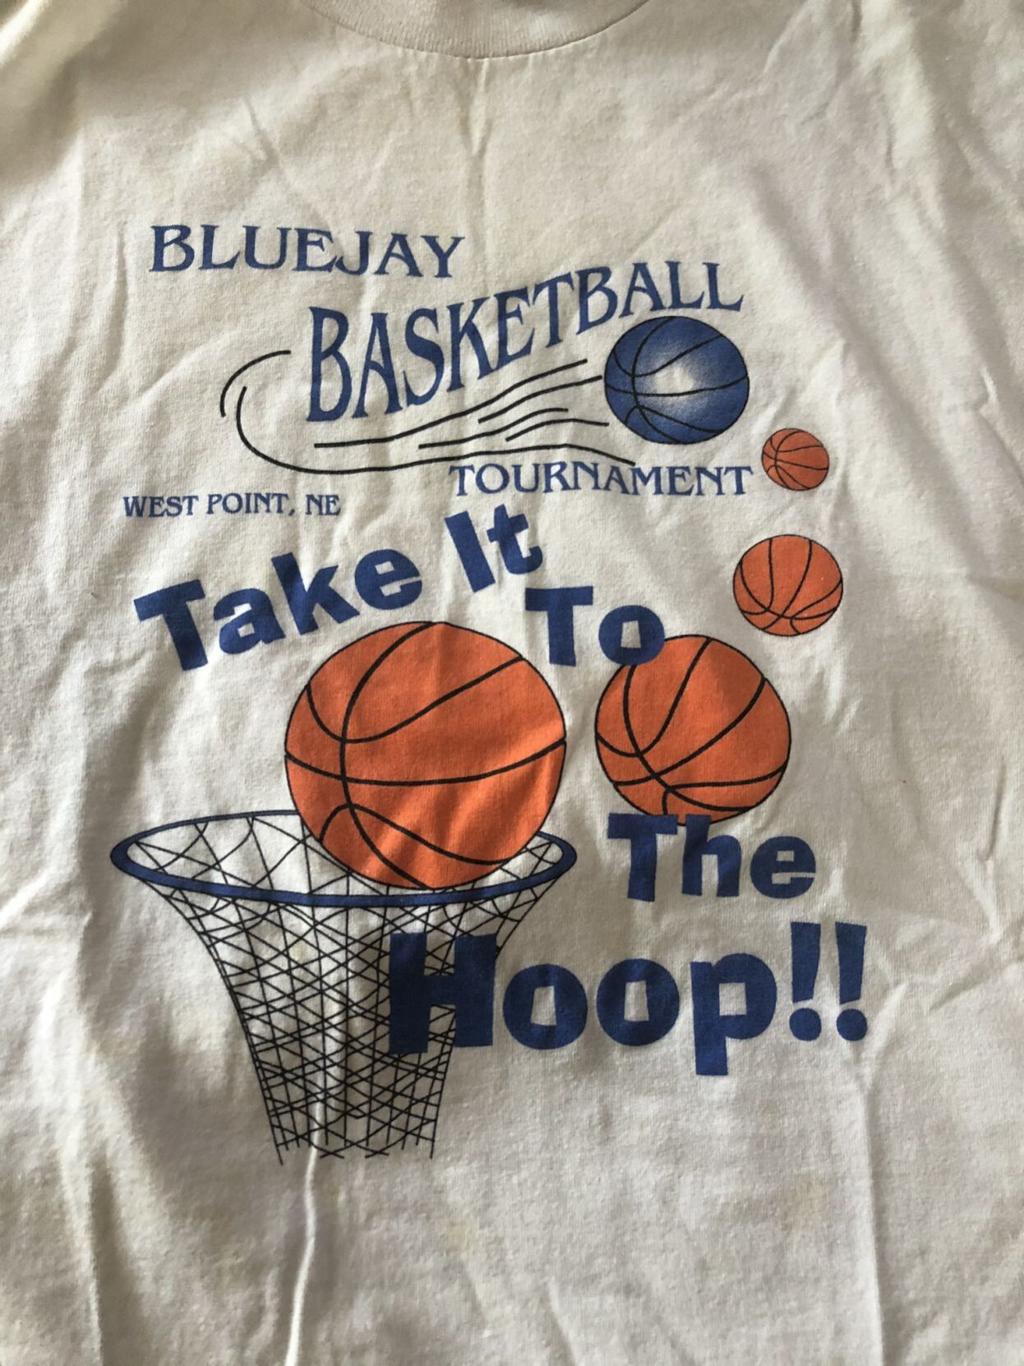 Photos: Remembering iconic sporting events through vintage T-shirts | Men's Basketball journalstar.com